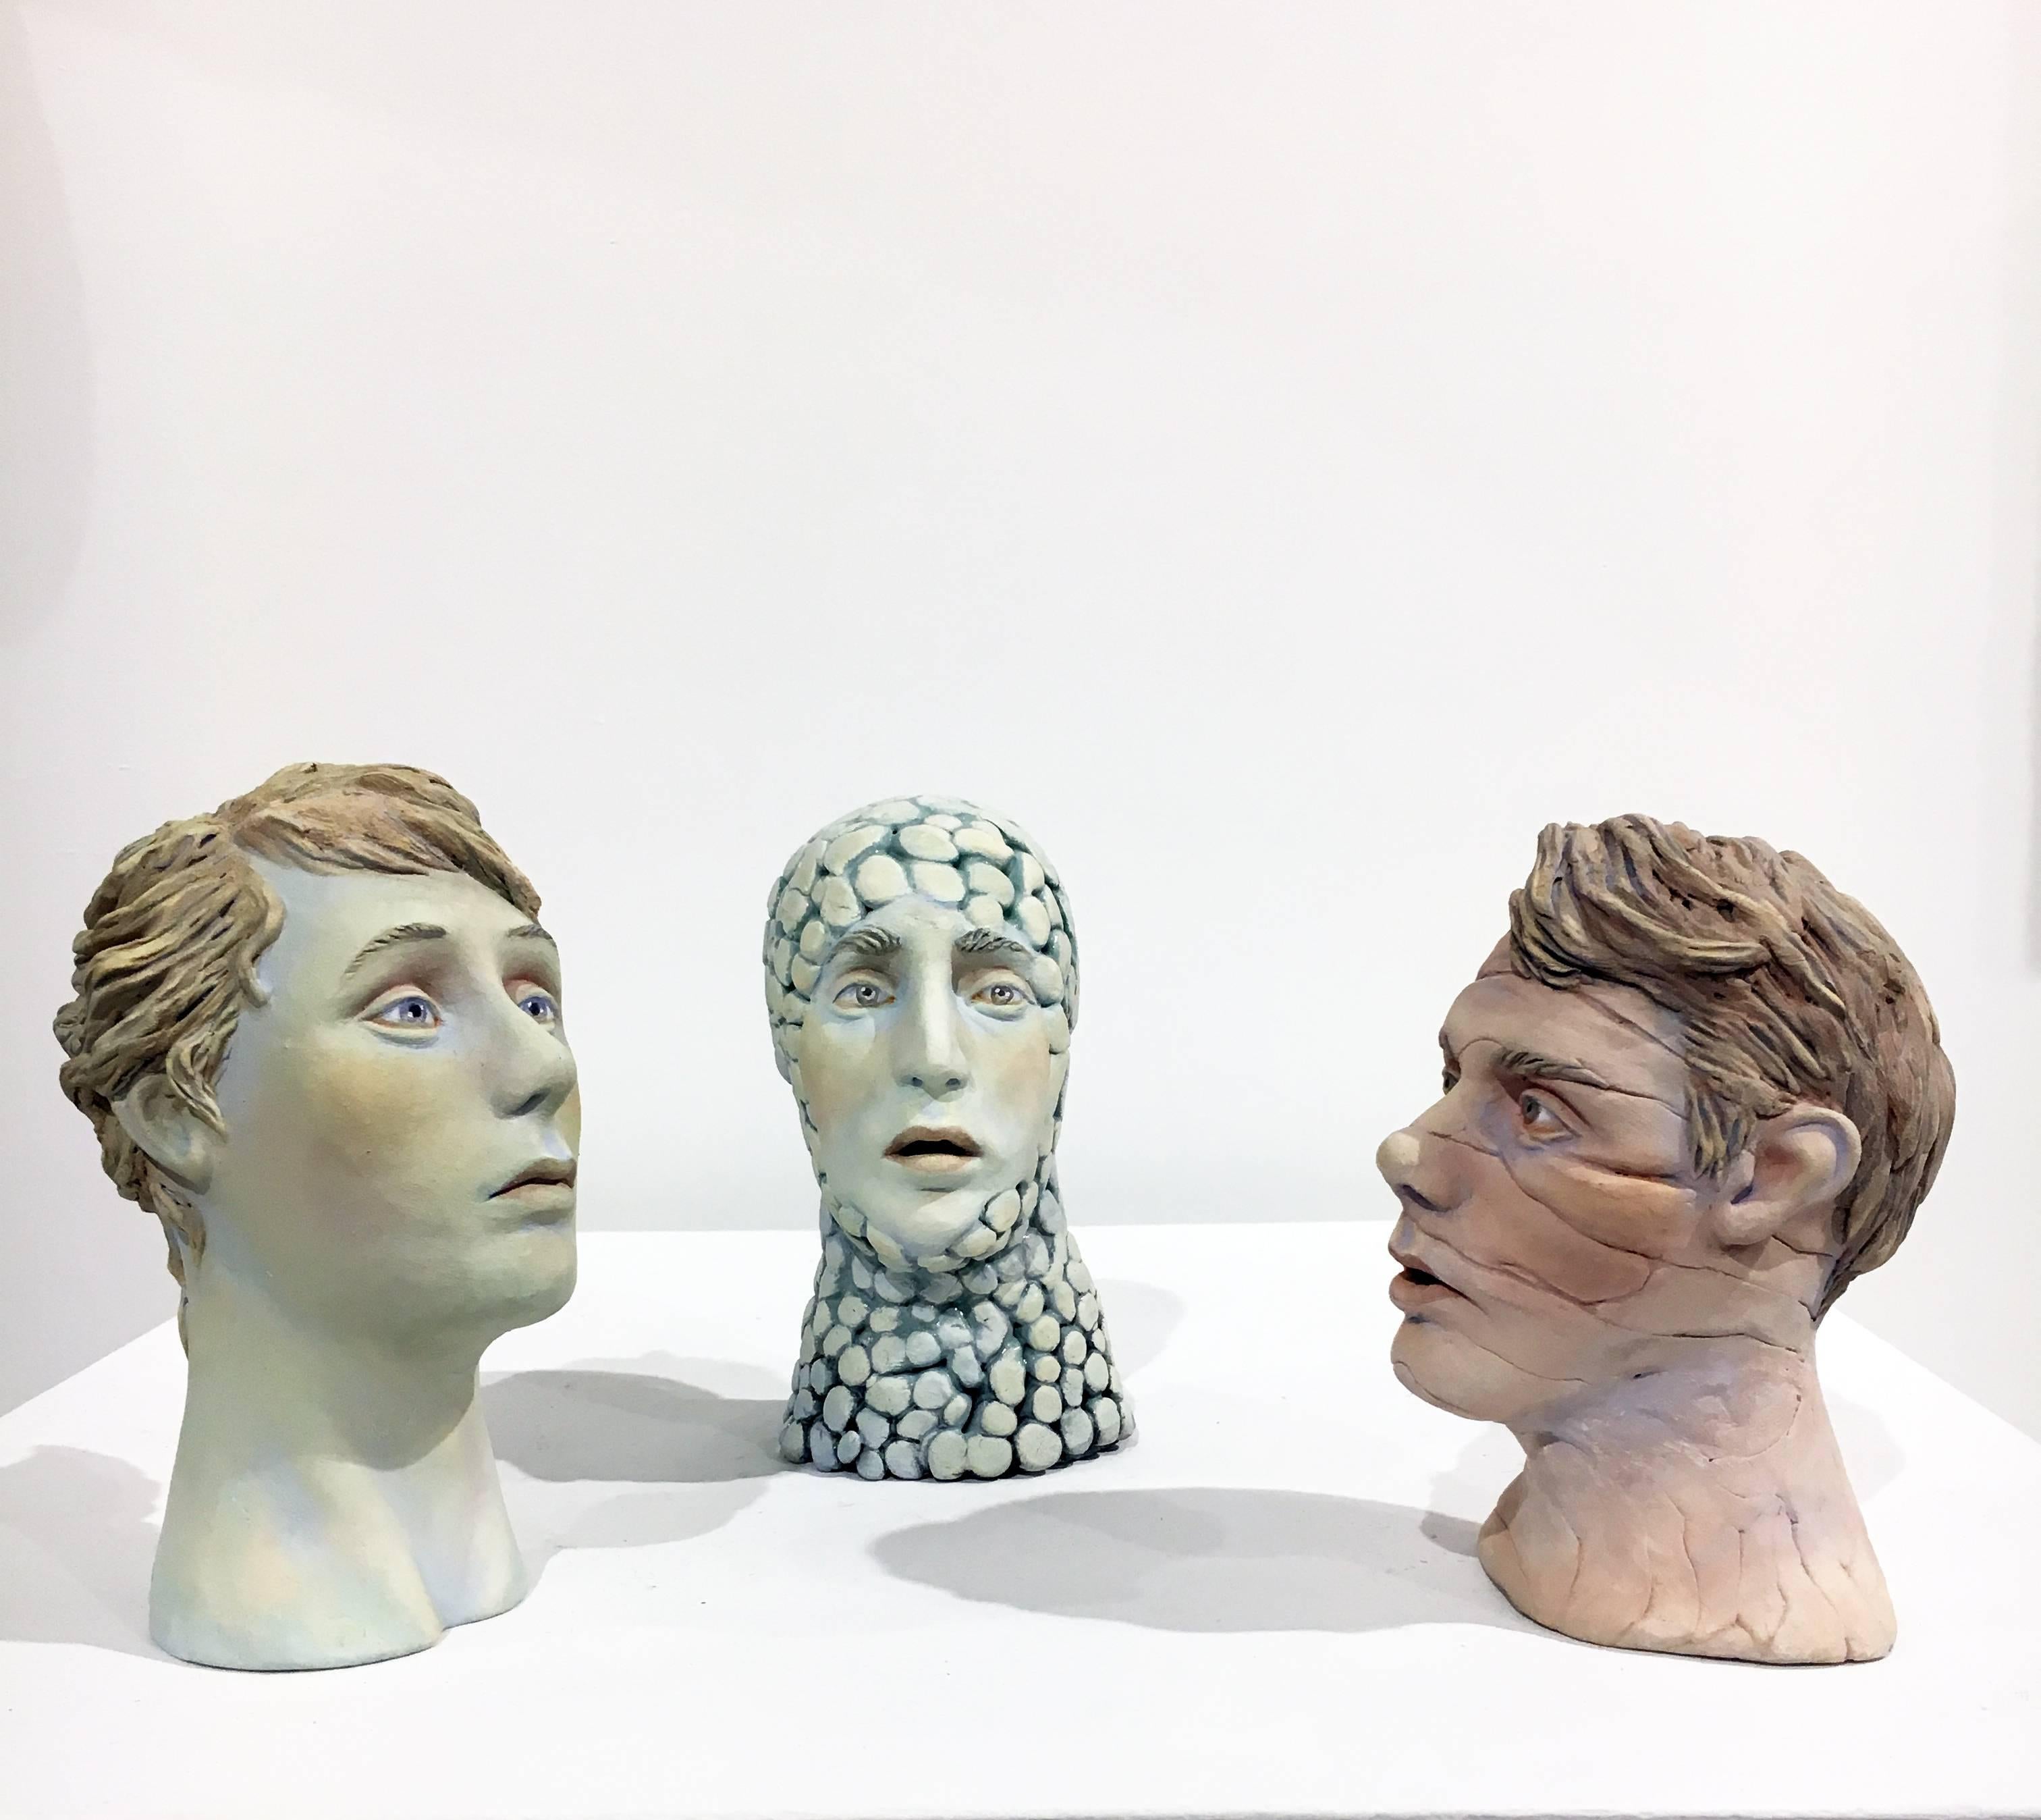 Beverly Mayeri Figurative Sculpture - "Conversation: Grouping 2", Ceramic Figures Colored with Acrylics and Glaze